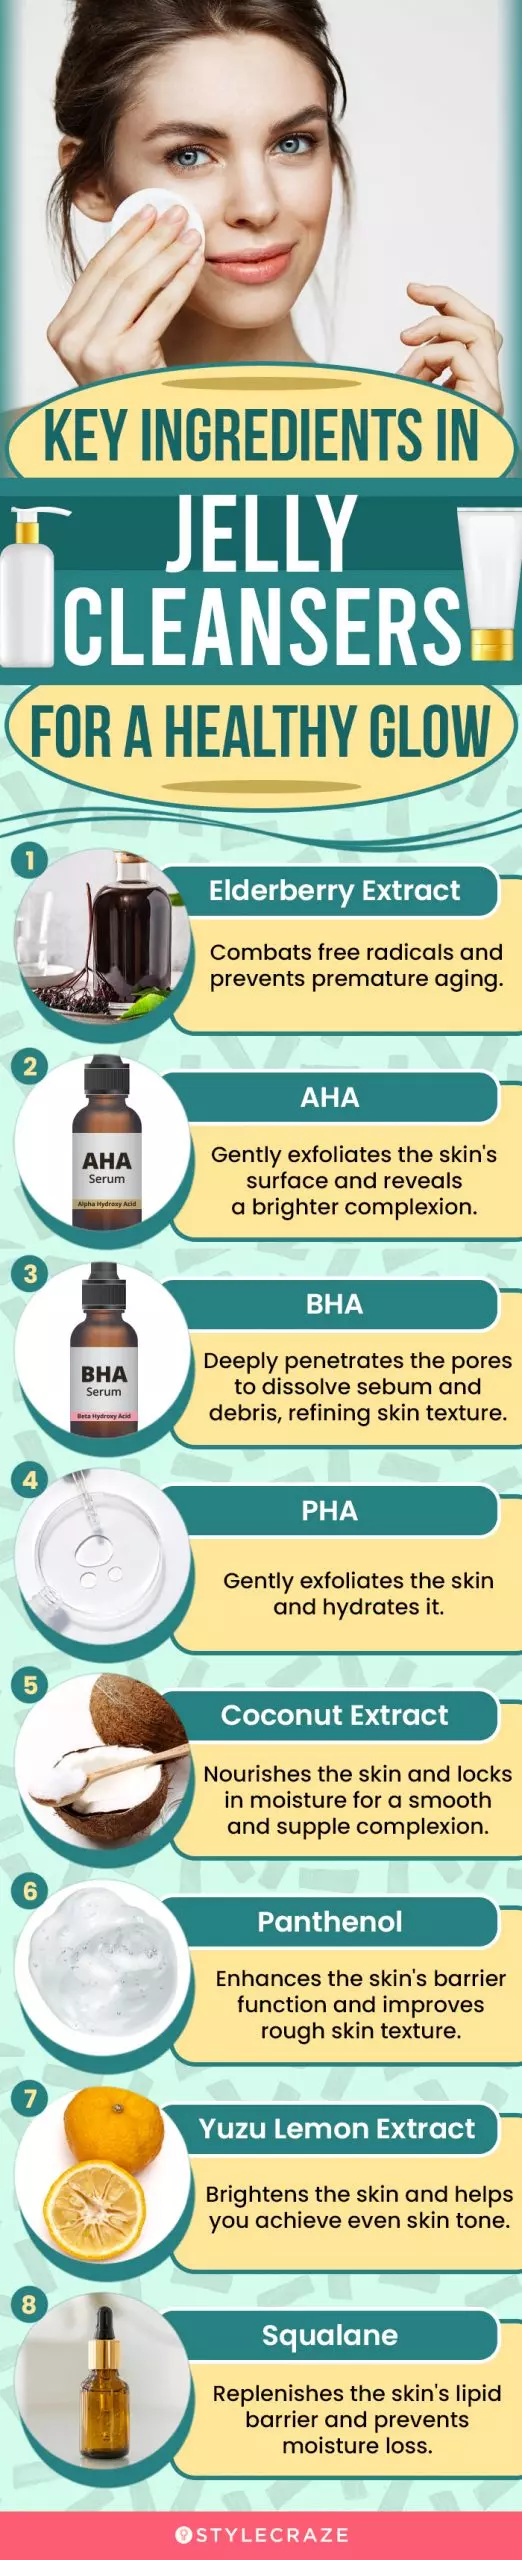 Key Ingredients In Jelly Cleansers For A Healthy Glow (infographic)